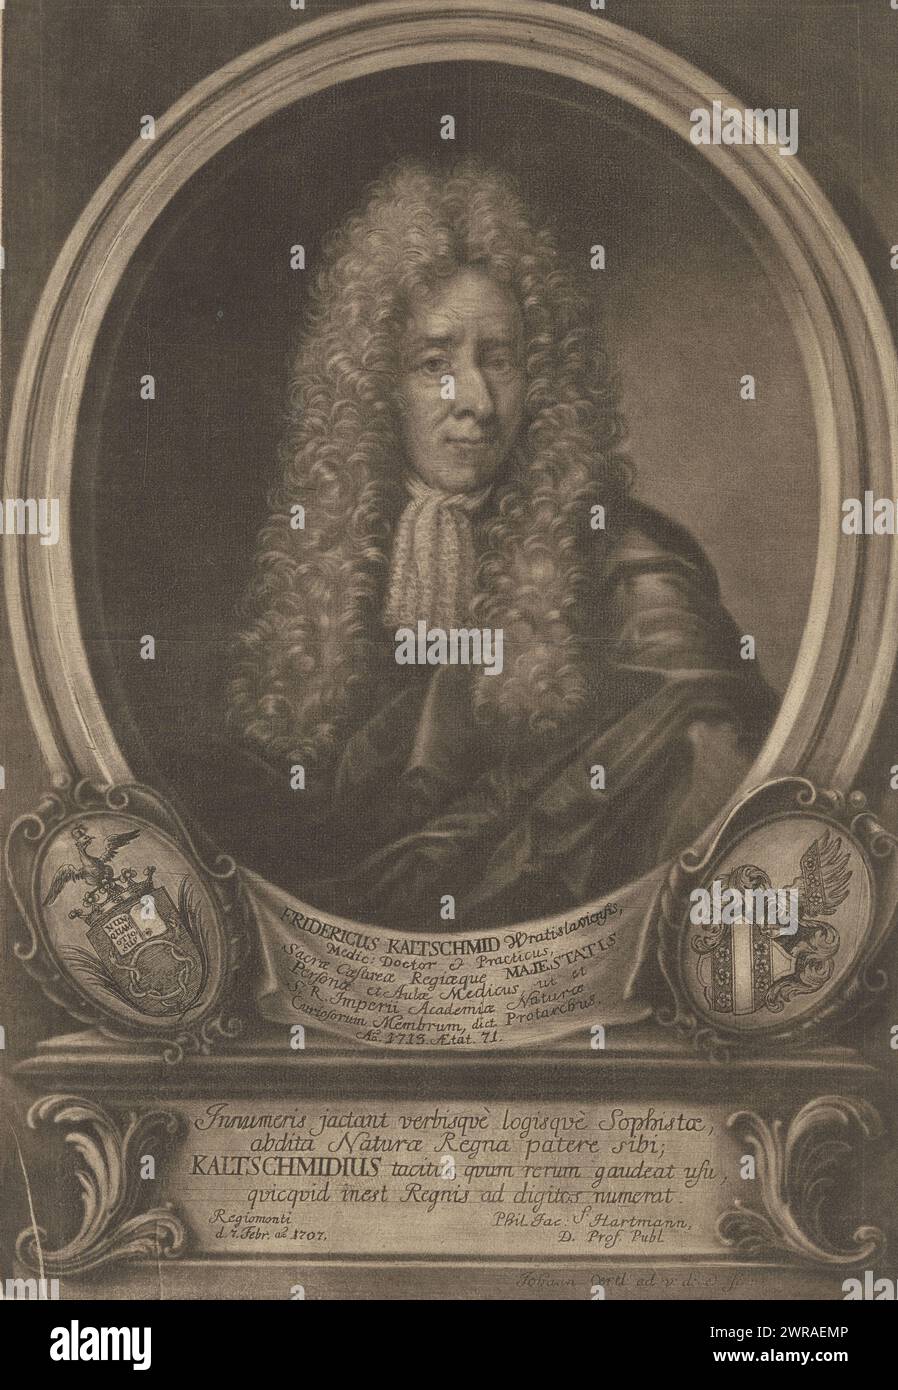 Portrait of Friedrich Kaltschmied at the age of 71, with caption in Latin., print maker: Johann Oertl, after drawing by: Johann Oertl, Philipp Jacob Hartmann, 1713, paper, etching, height 355 mm × width 247 mm, print Stock Photo